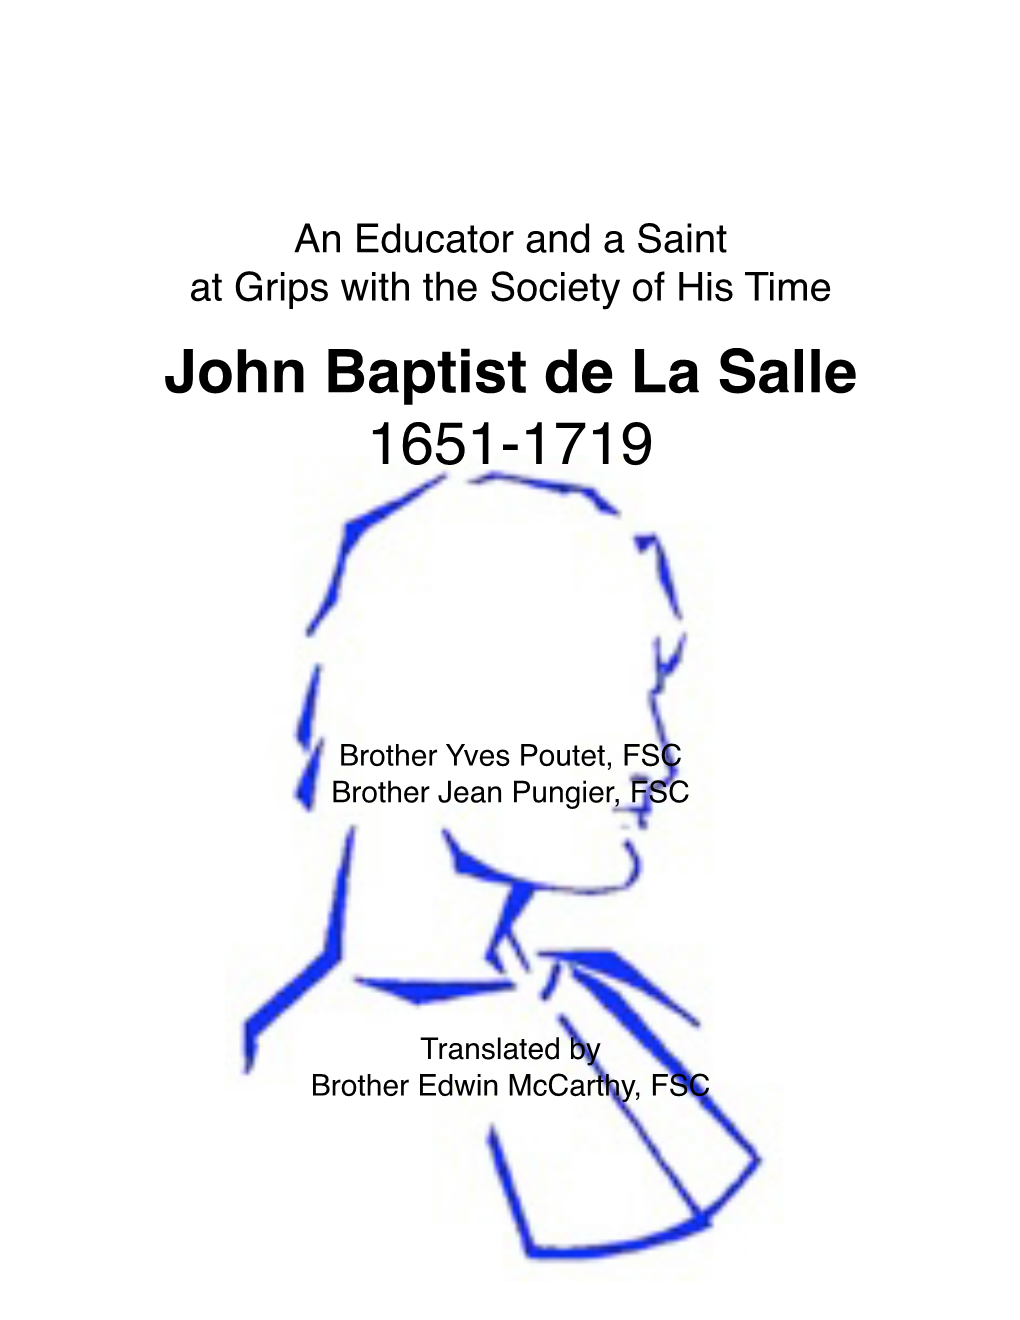 An Educator and a Saint at Grips with the Society of His Time: John